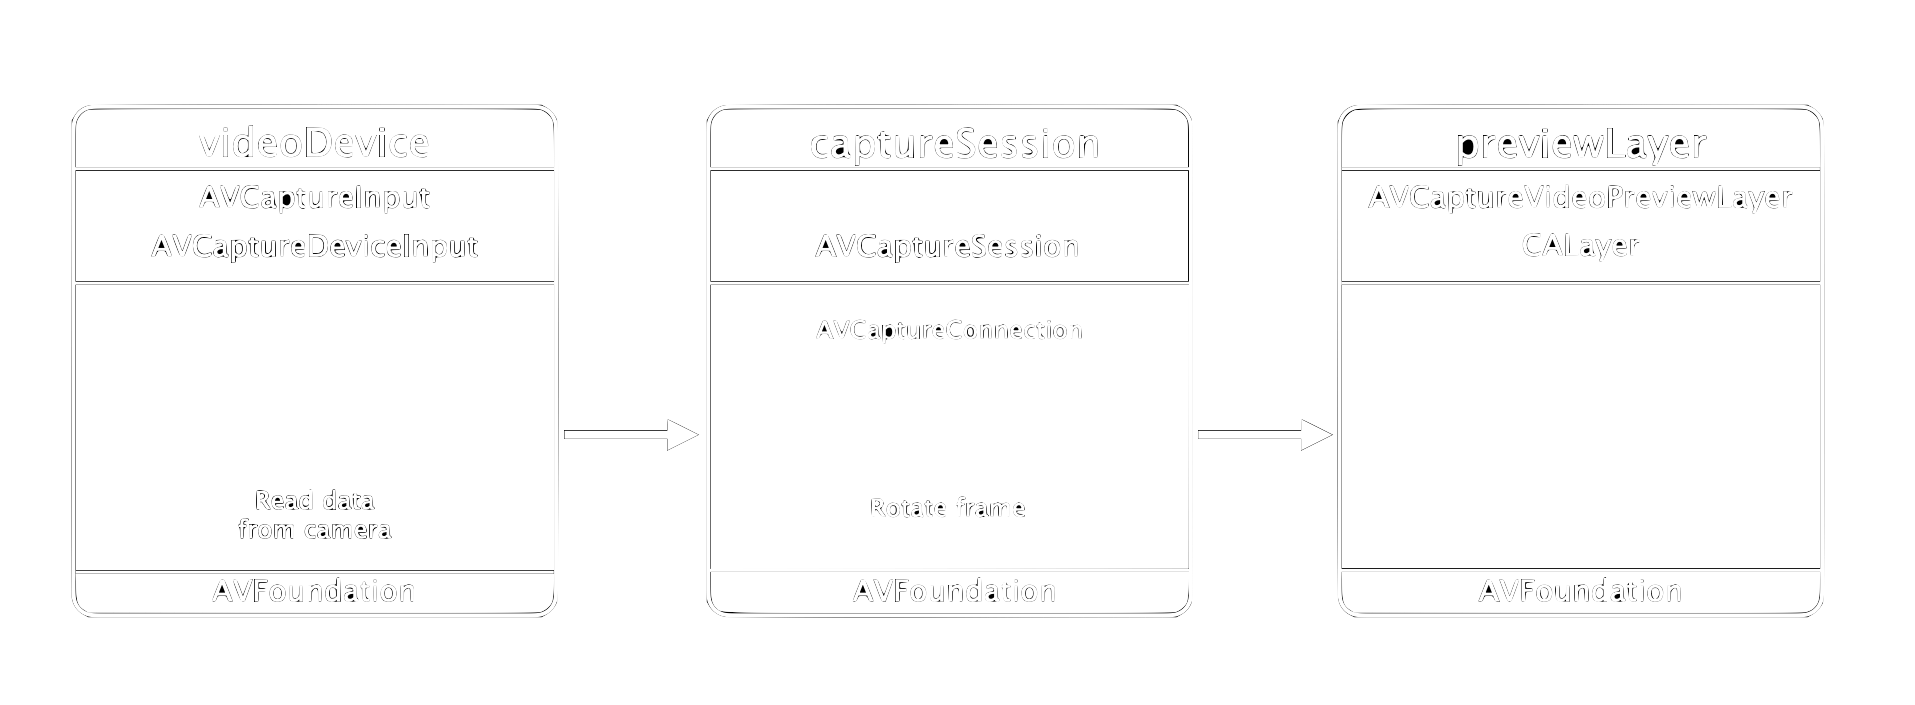 Capture session with camera as input and preview layer as output.